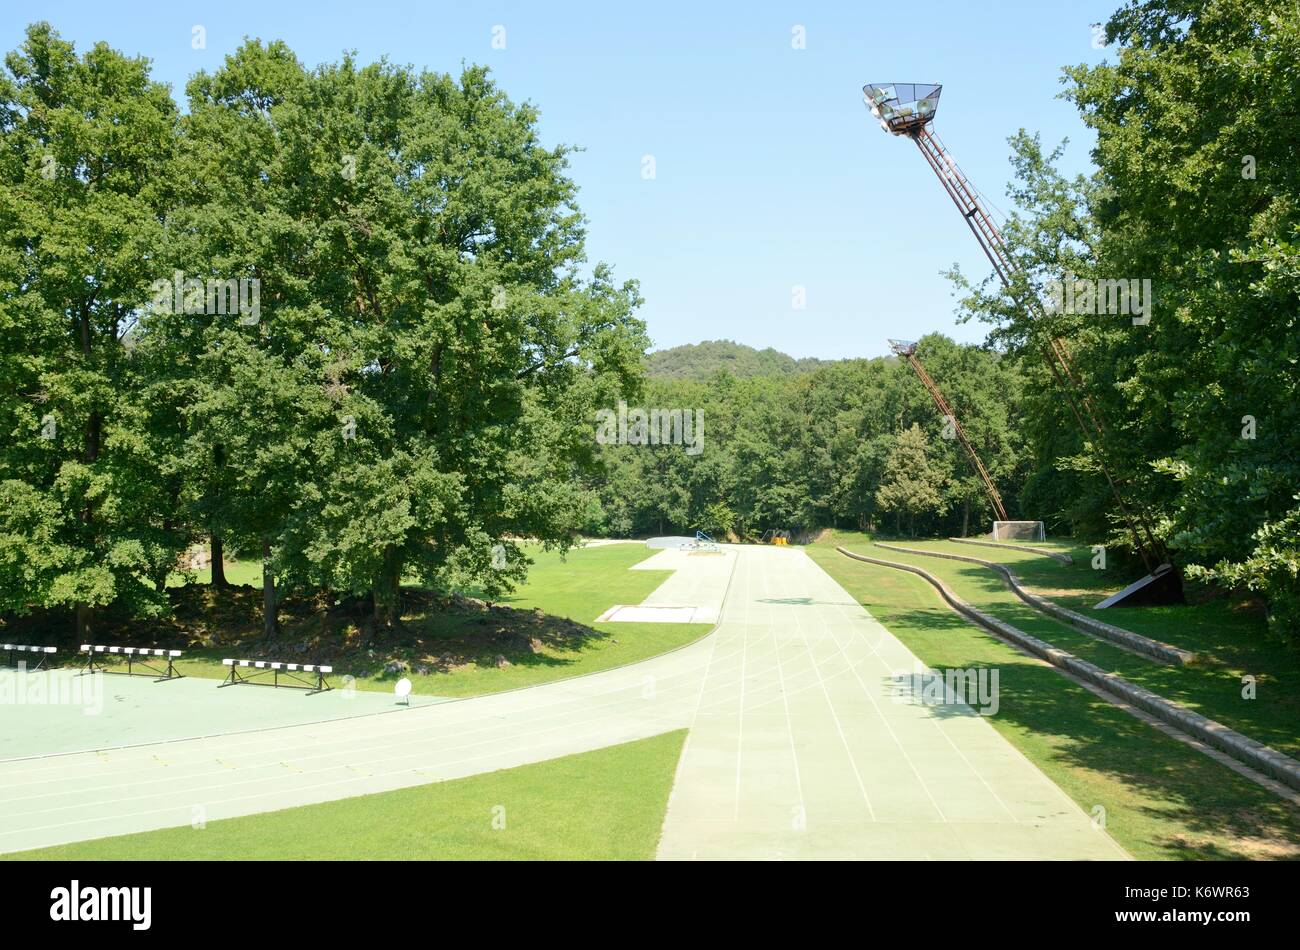 Athletics track designed by RCR architects located in Olot, in the Province of Girona, Catalonia, Spain. Stock Photo